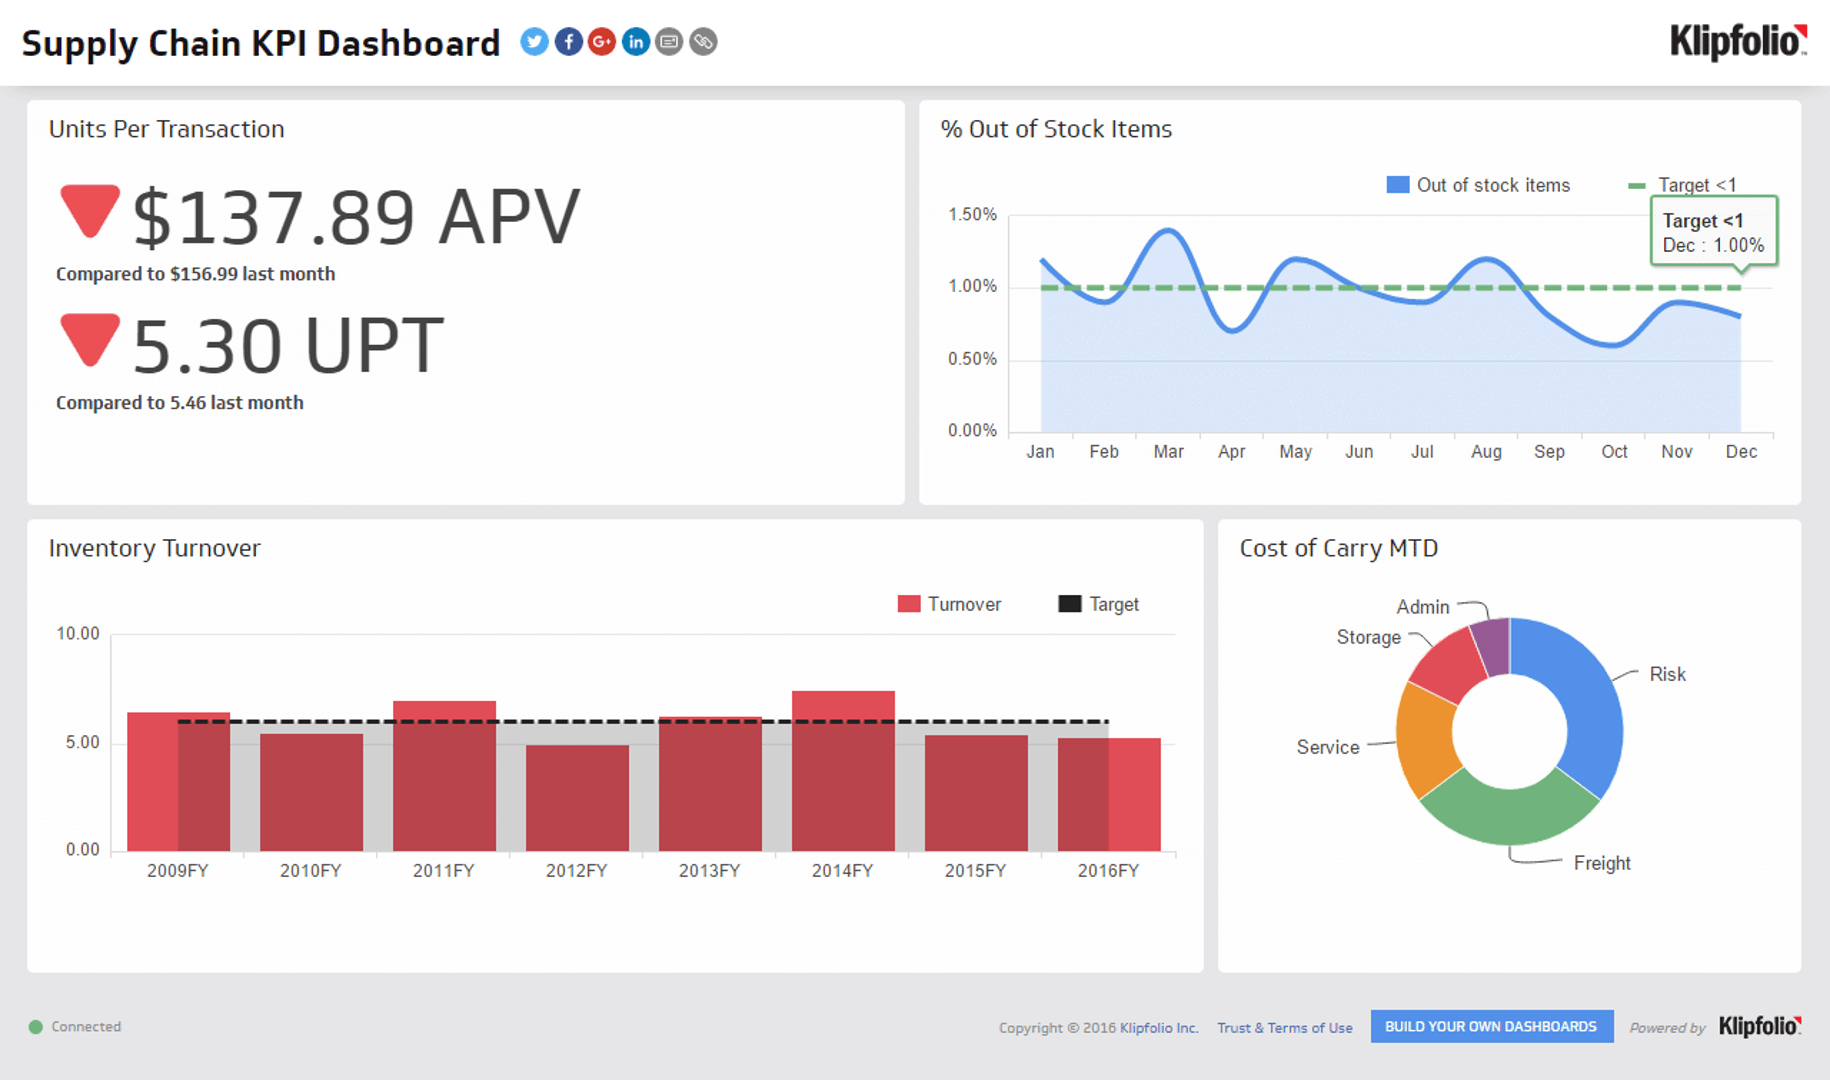 Related Dashboard Examples - Supply Chain KPI Dashboard